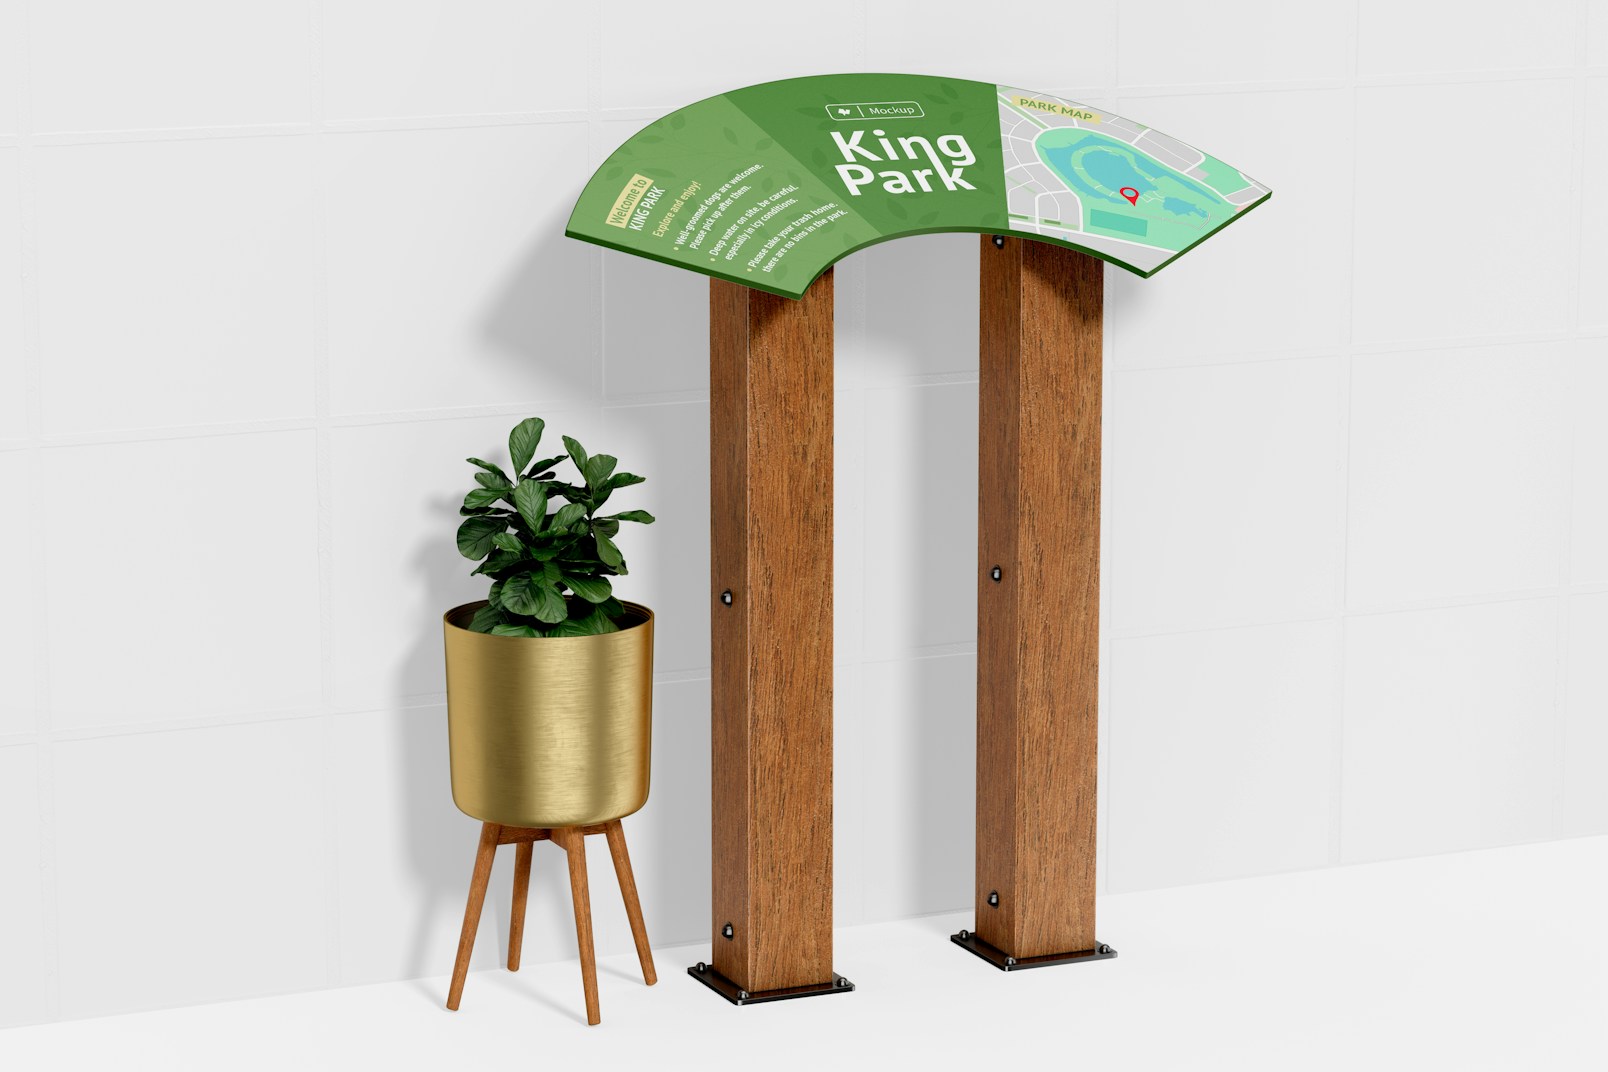 Outdoor Wayfinding Table Mockup, with Pot